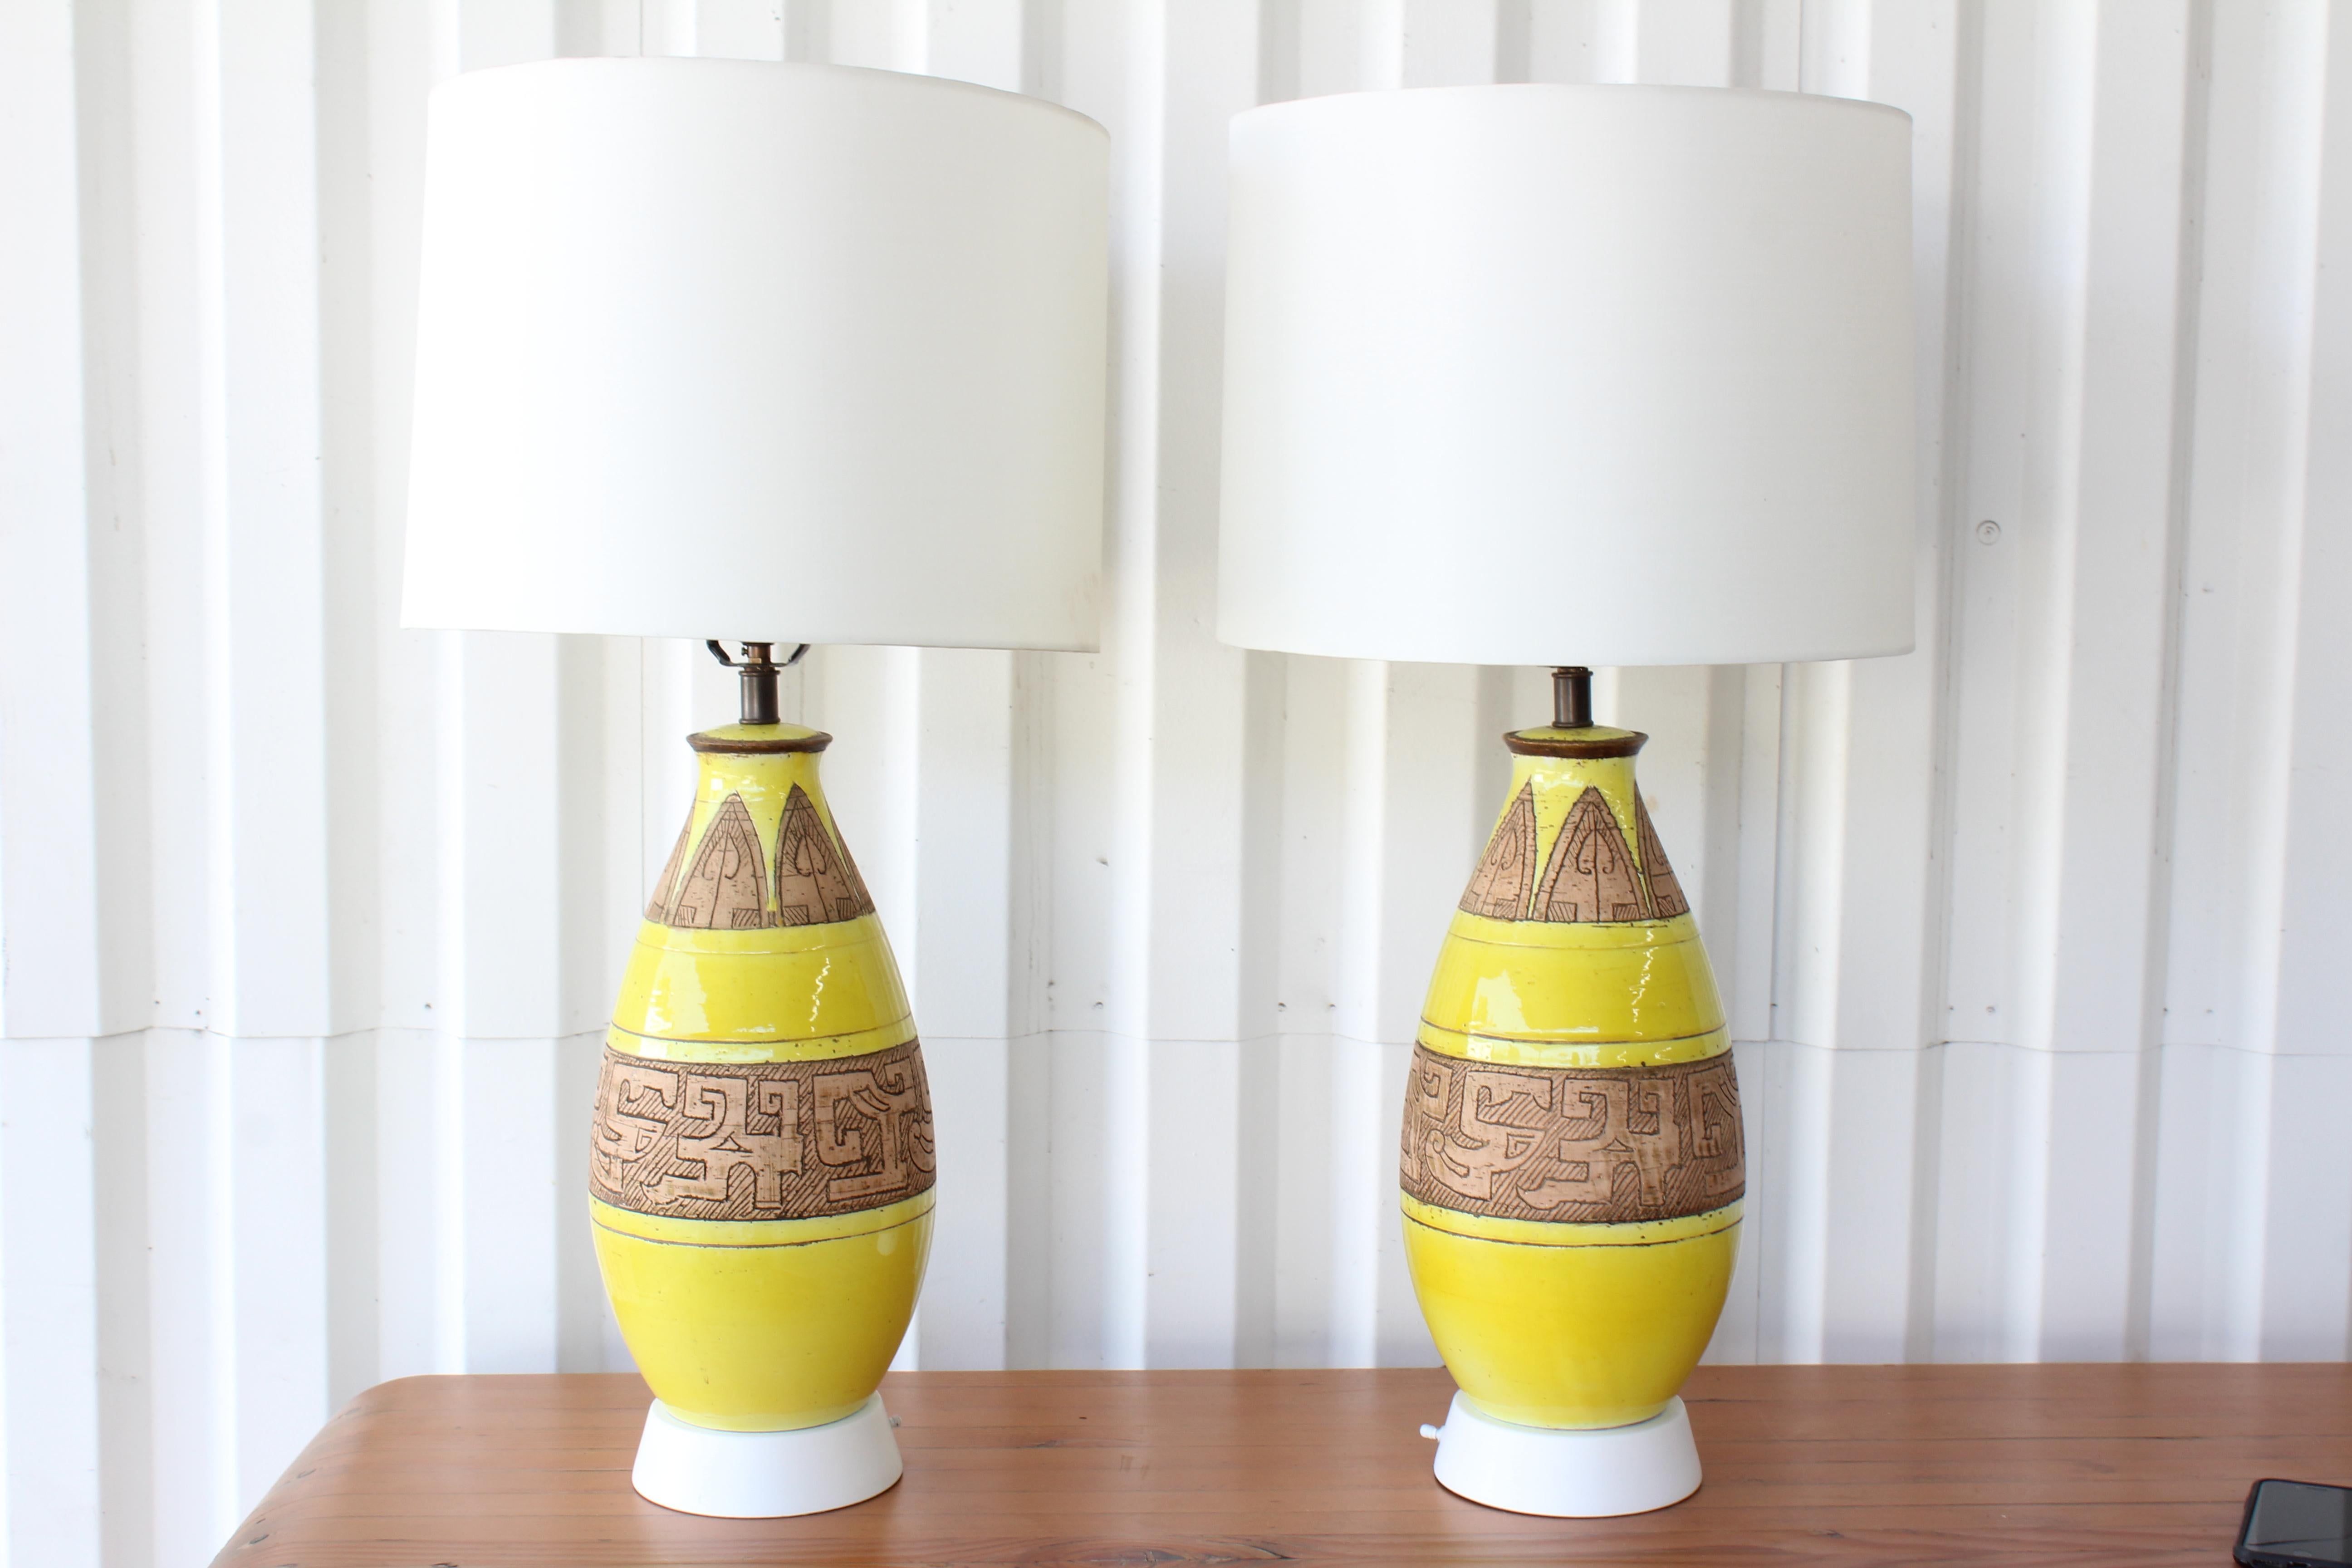 Pair of 1960s ceramic porcelain table lamps with a yellow glaze and Egyptian motifs. Newly rewired with silk shades. Newly painted bases in white lacquer. Sold as a pair. 
Measures: 32.5